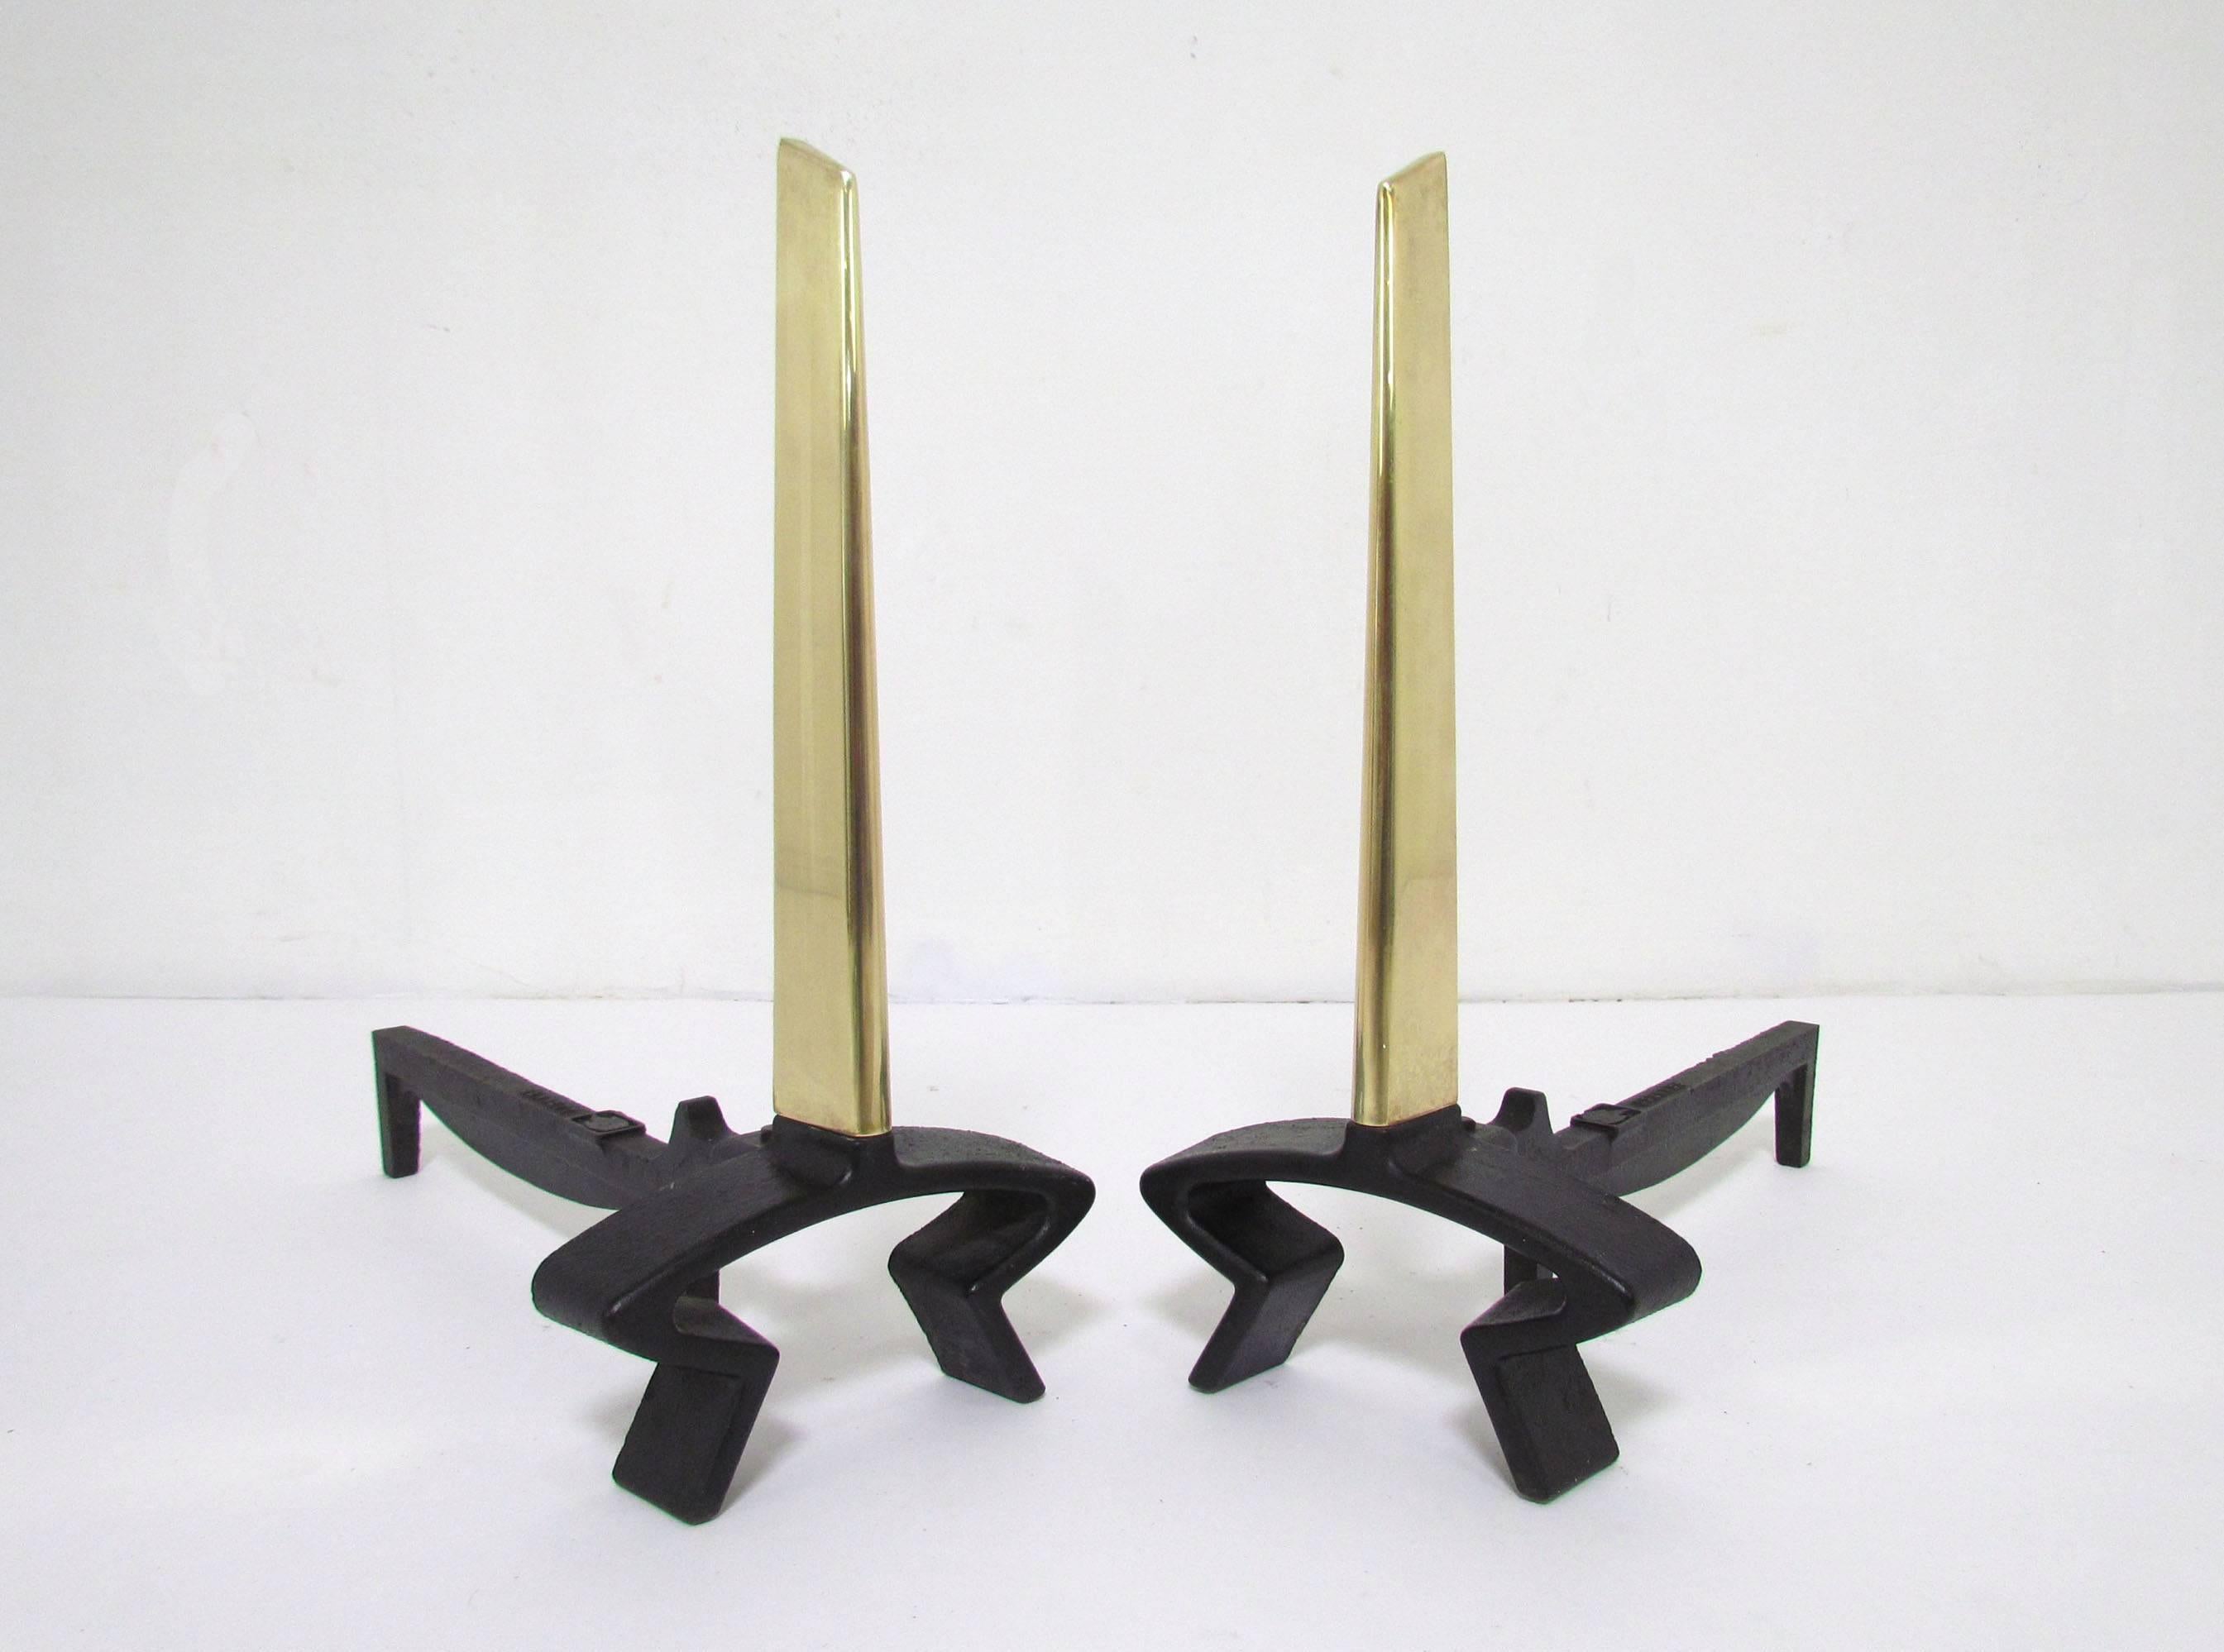 Pair of modernist andirons in brass and iron, designed by Donald Deskey for Bennett, circa 1950s.